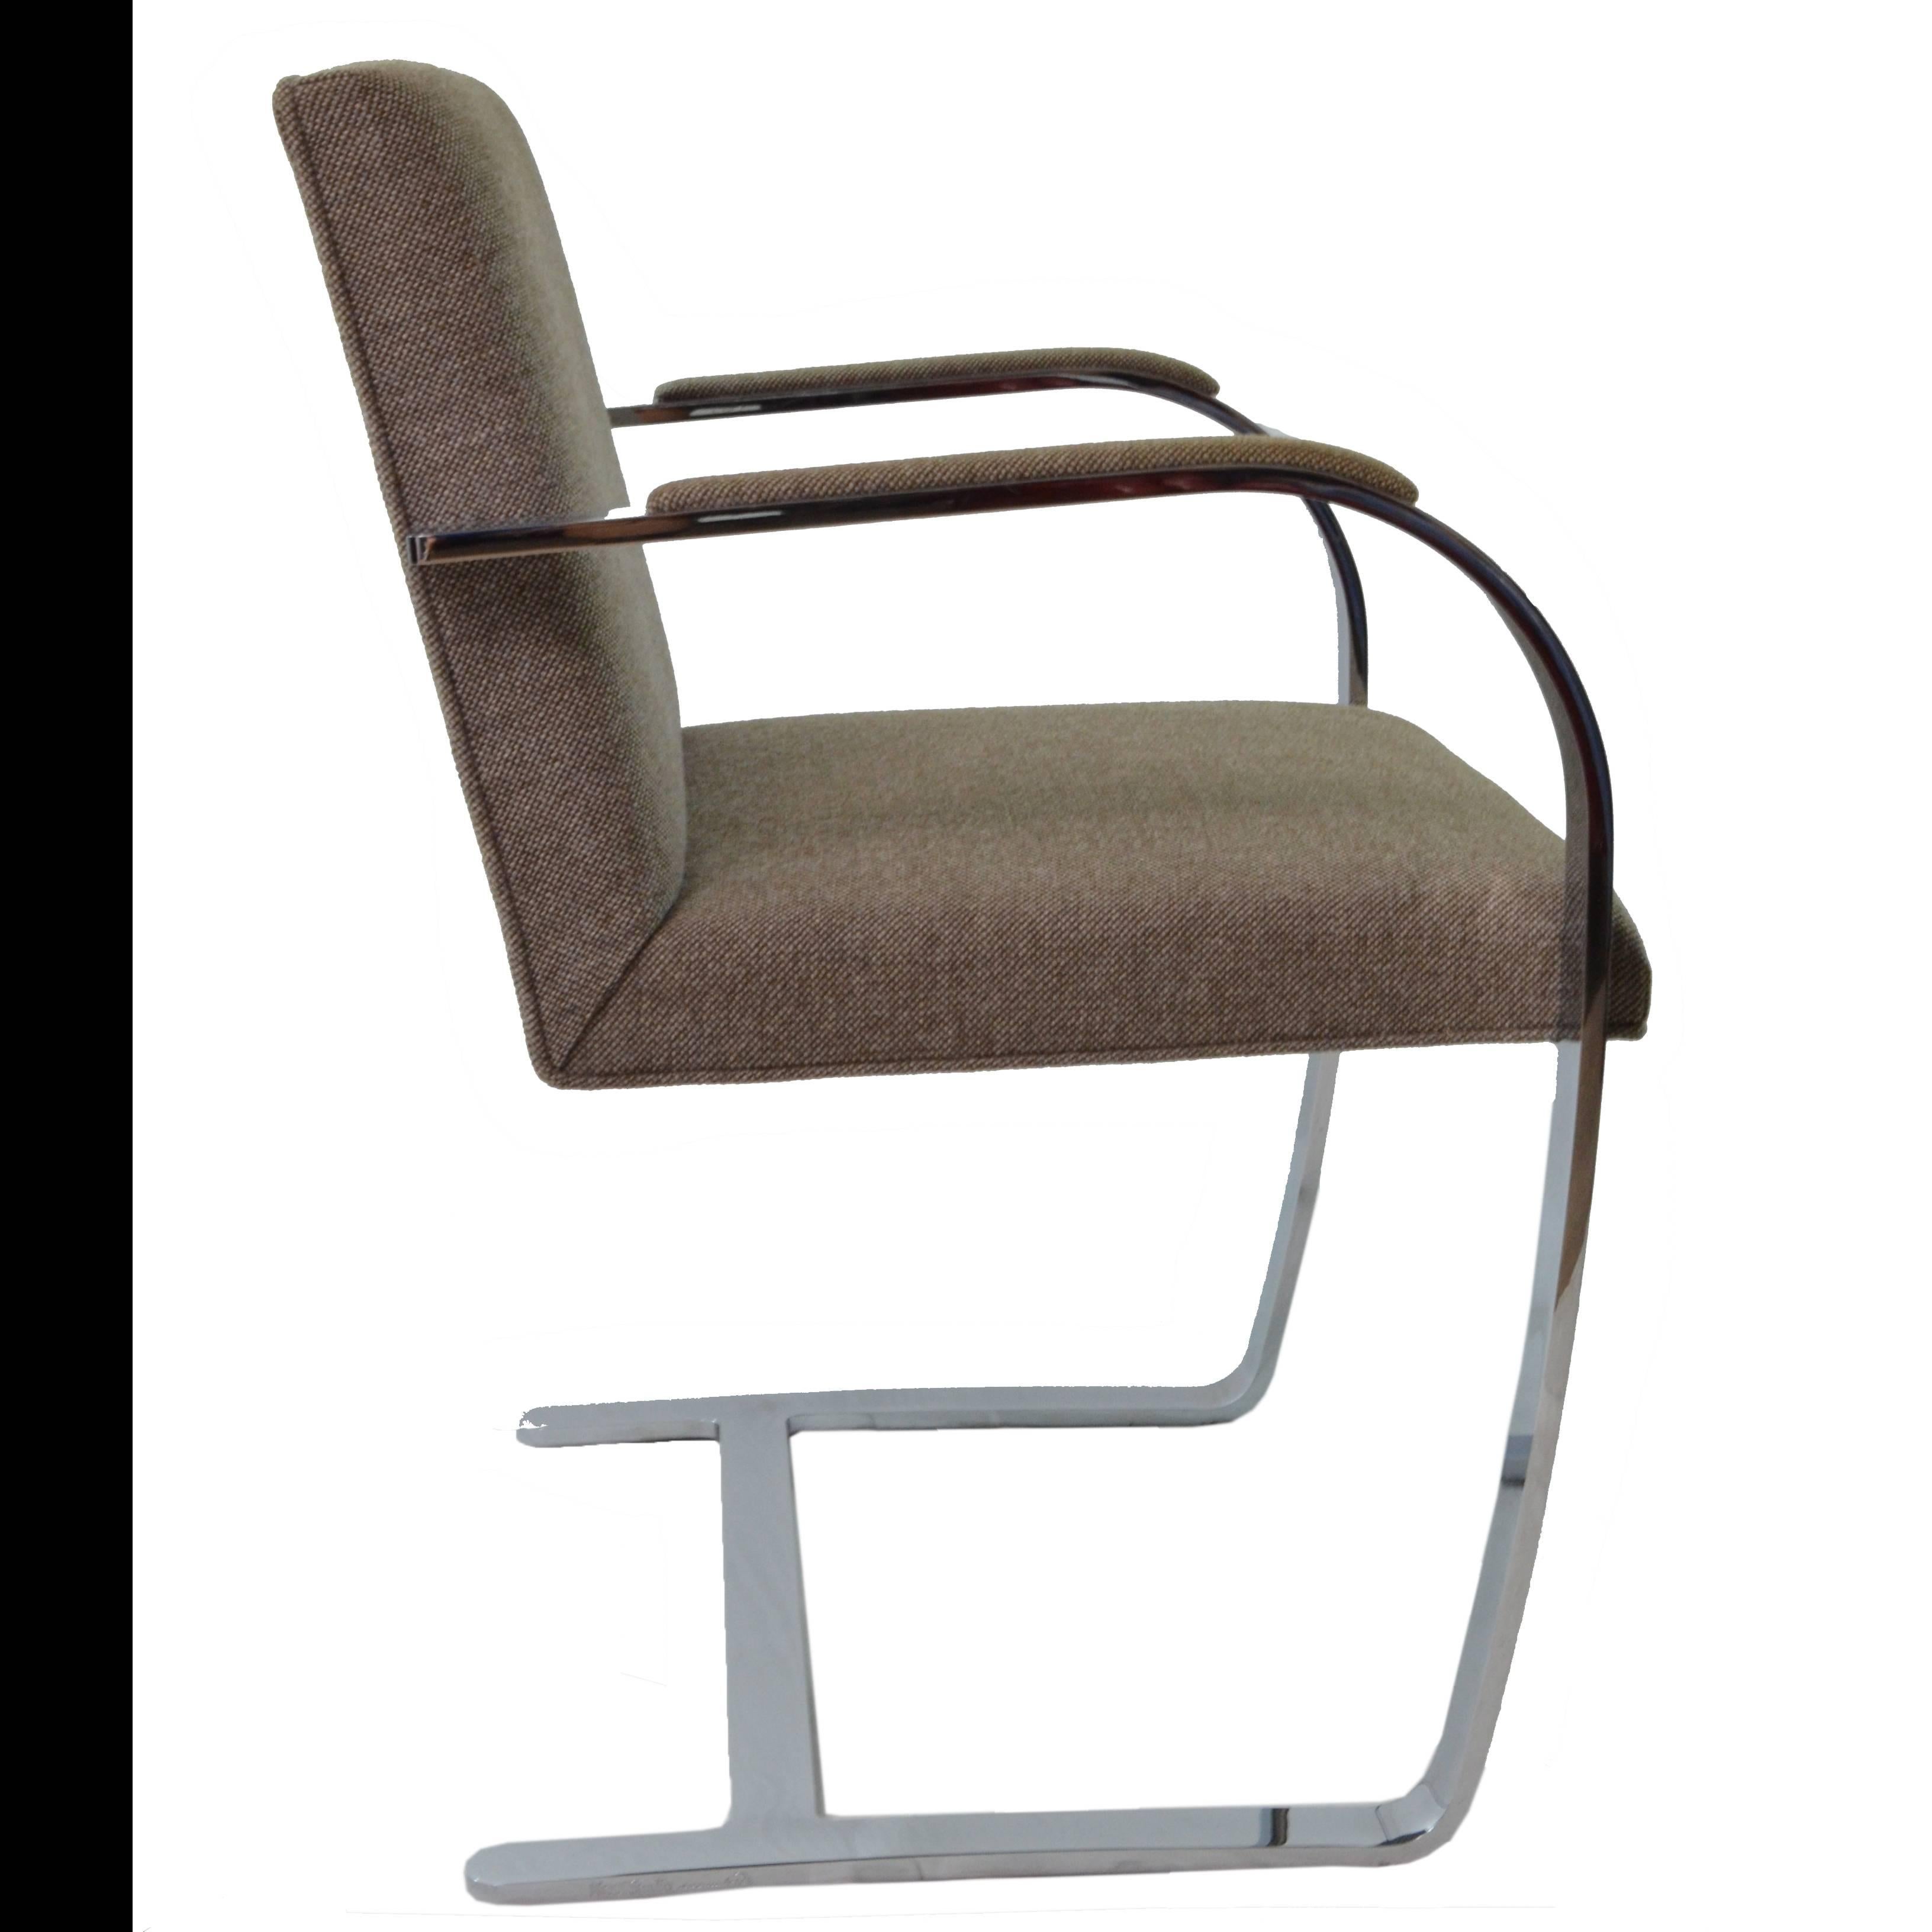 Brno 255 model chairs designed by Mies van der Rohe in 1930. The chair, an icon of 20th century design has been produced since 1960s. These items have been produced circa 2000. The structure is polished chrome-plated steel. There are no visible